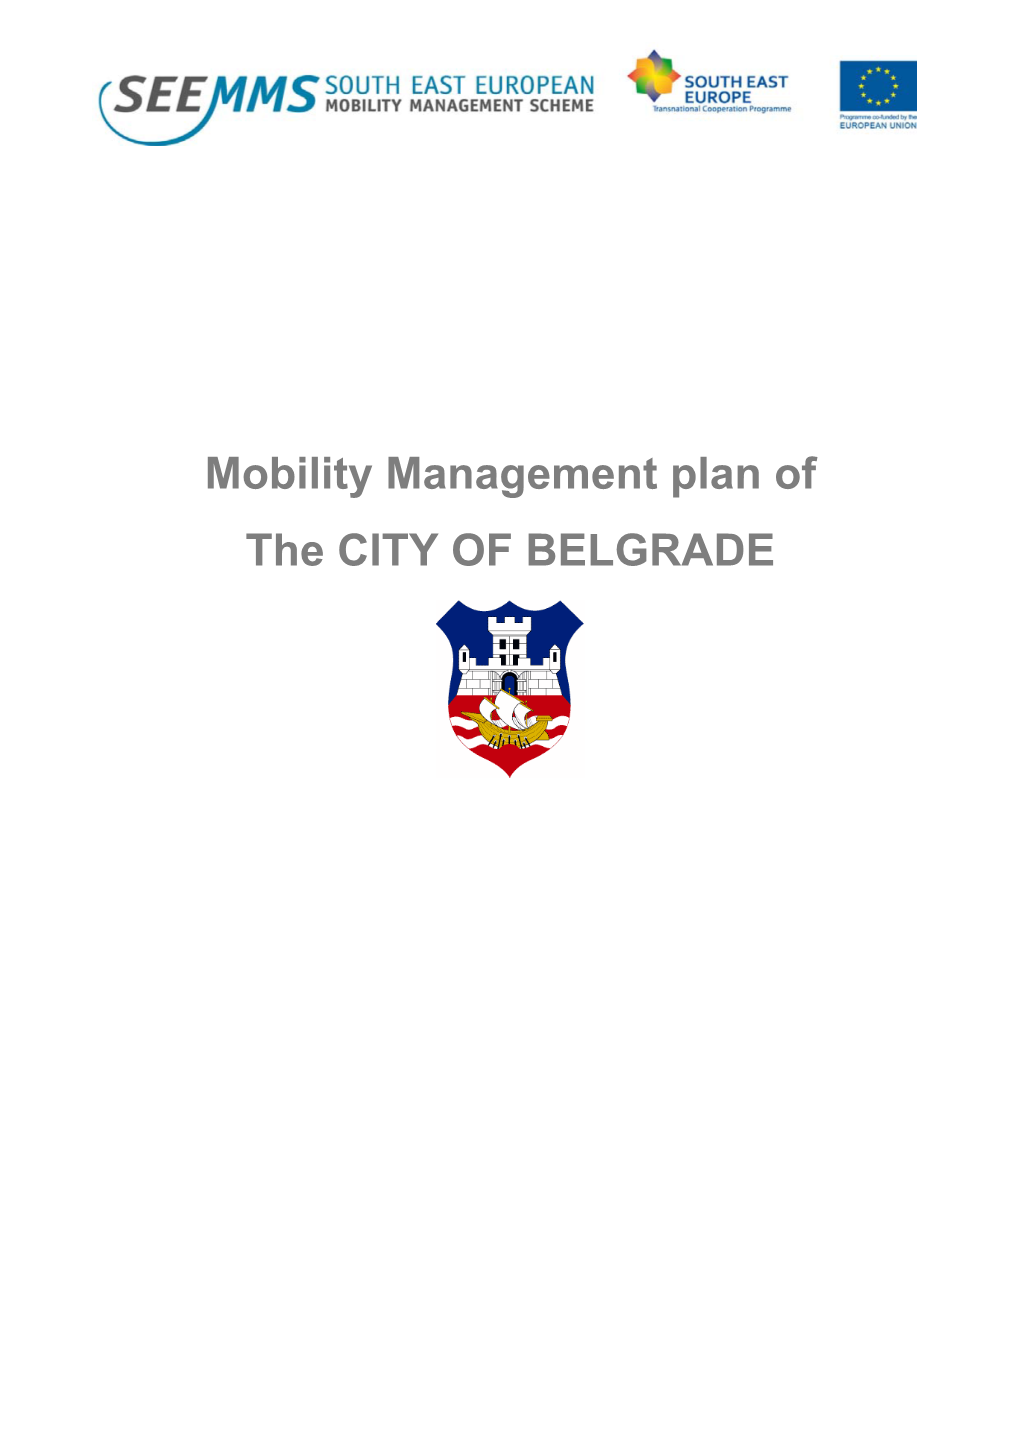 Mobility Management Plan of the CITY of BELGRADE